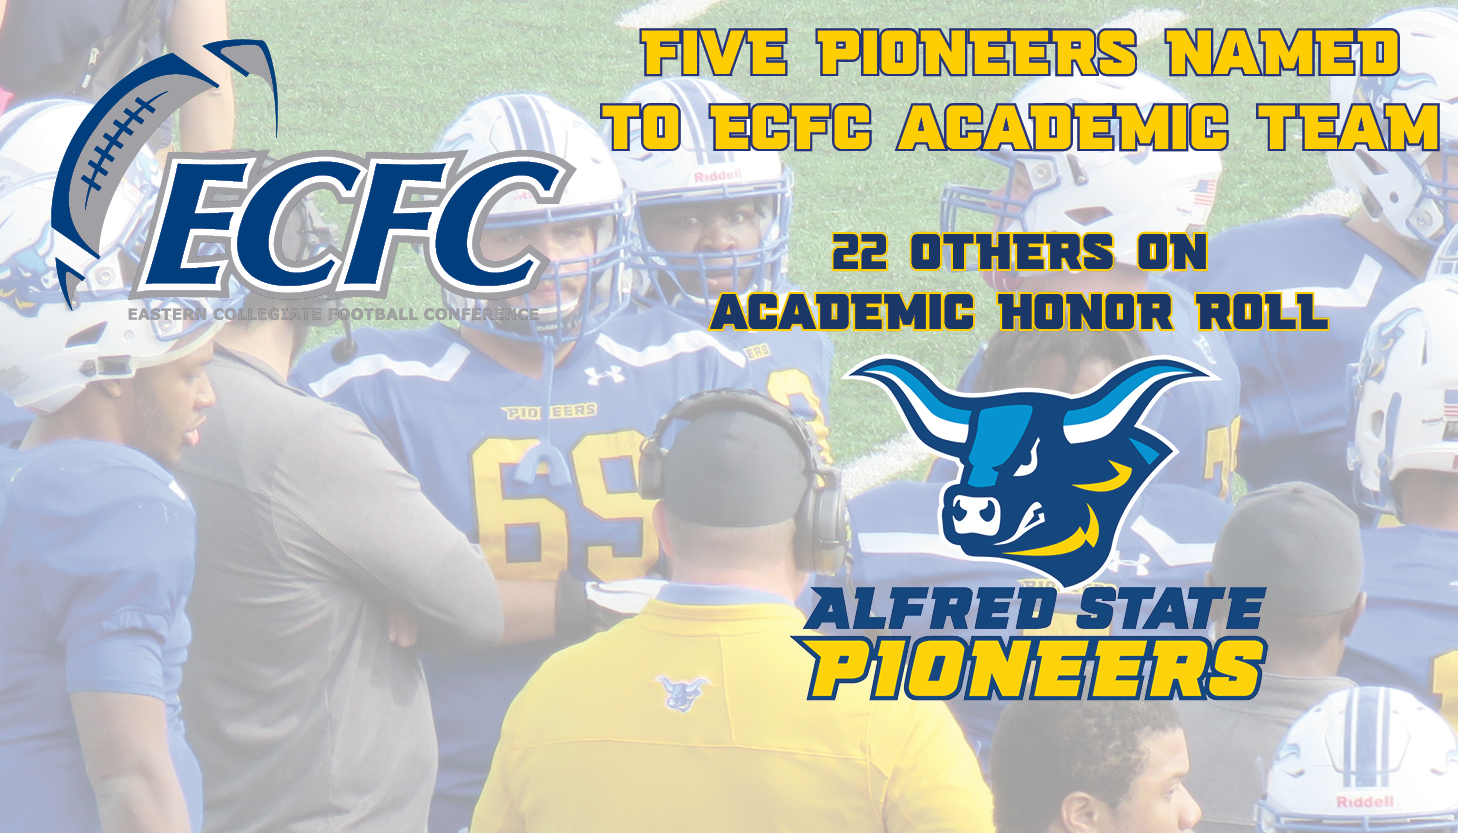 Five Pioneers Named to ECFC All Academic Team

Pictured is the ECFC and Alfred State logos and in background is a team sideline meeting.